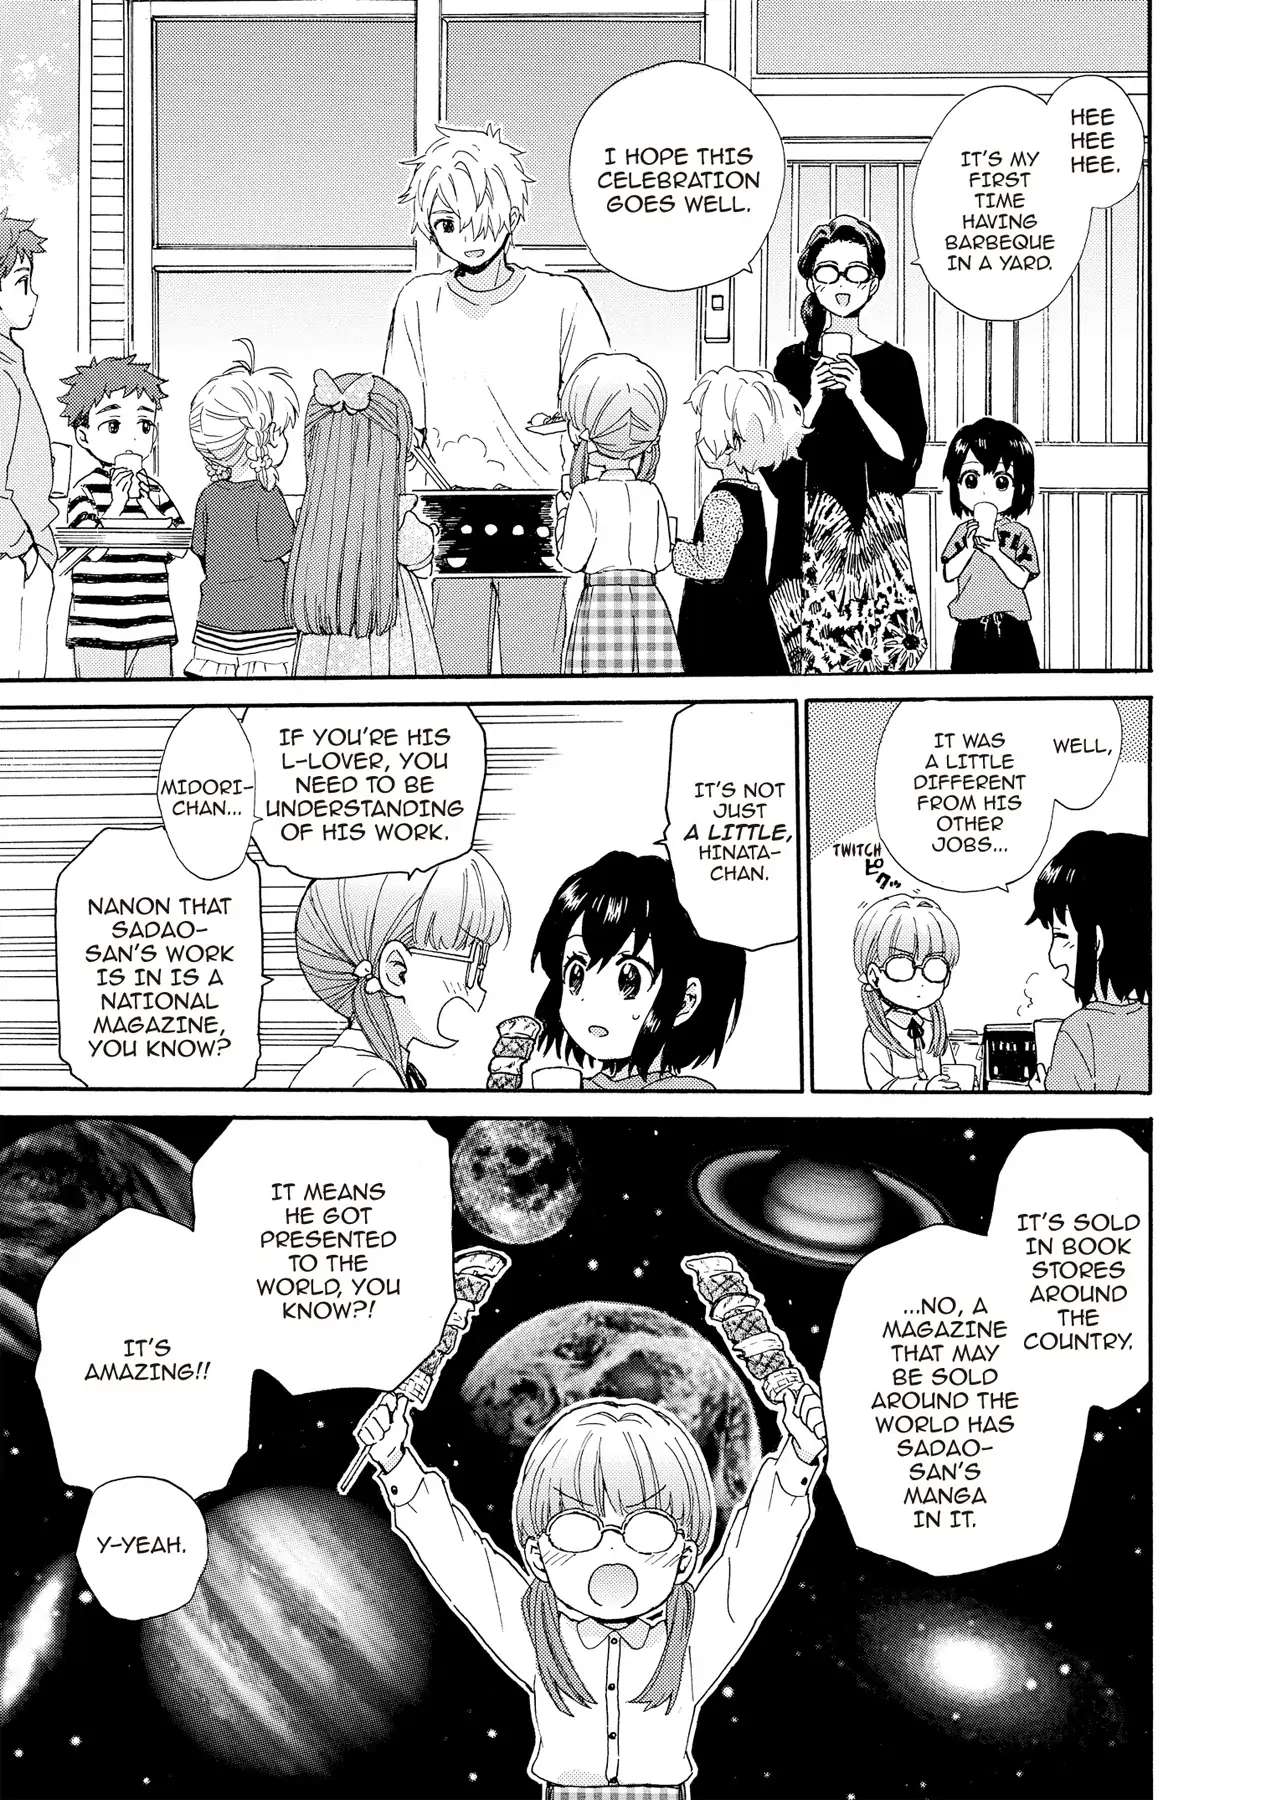 The Cute Little Granny Girl Hinata-chan - chapter 92 - #3